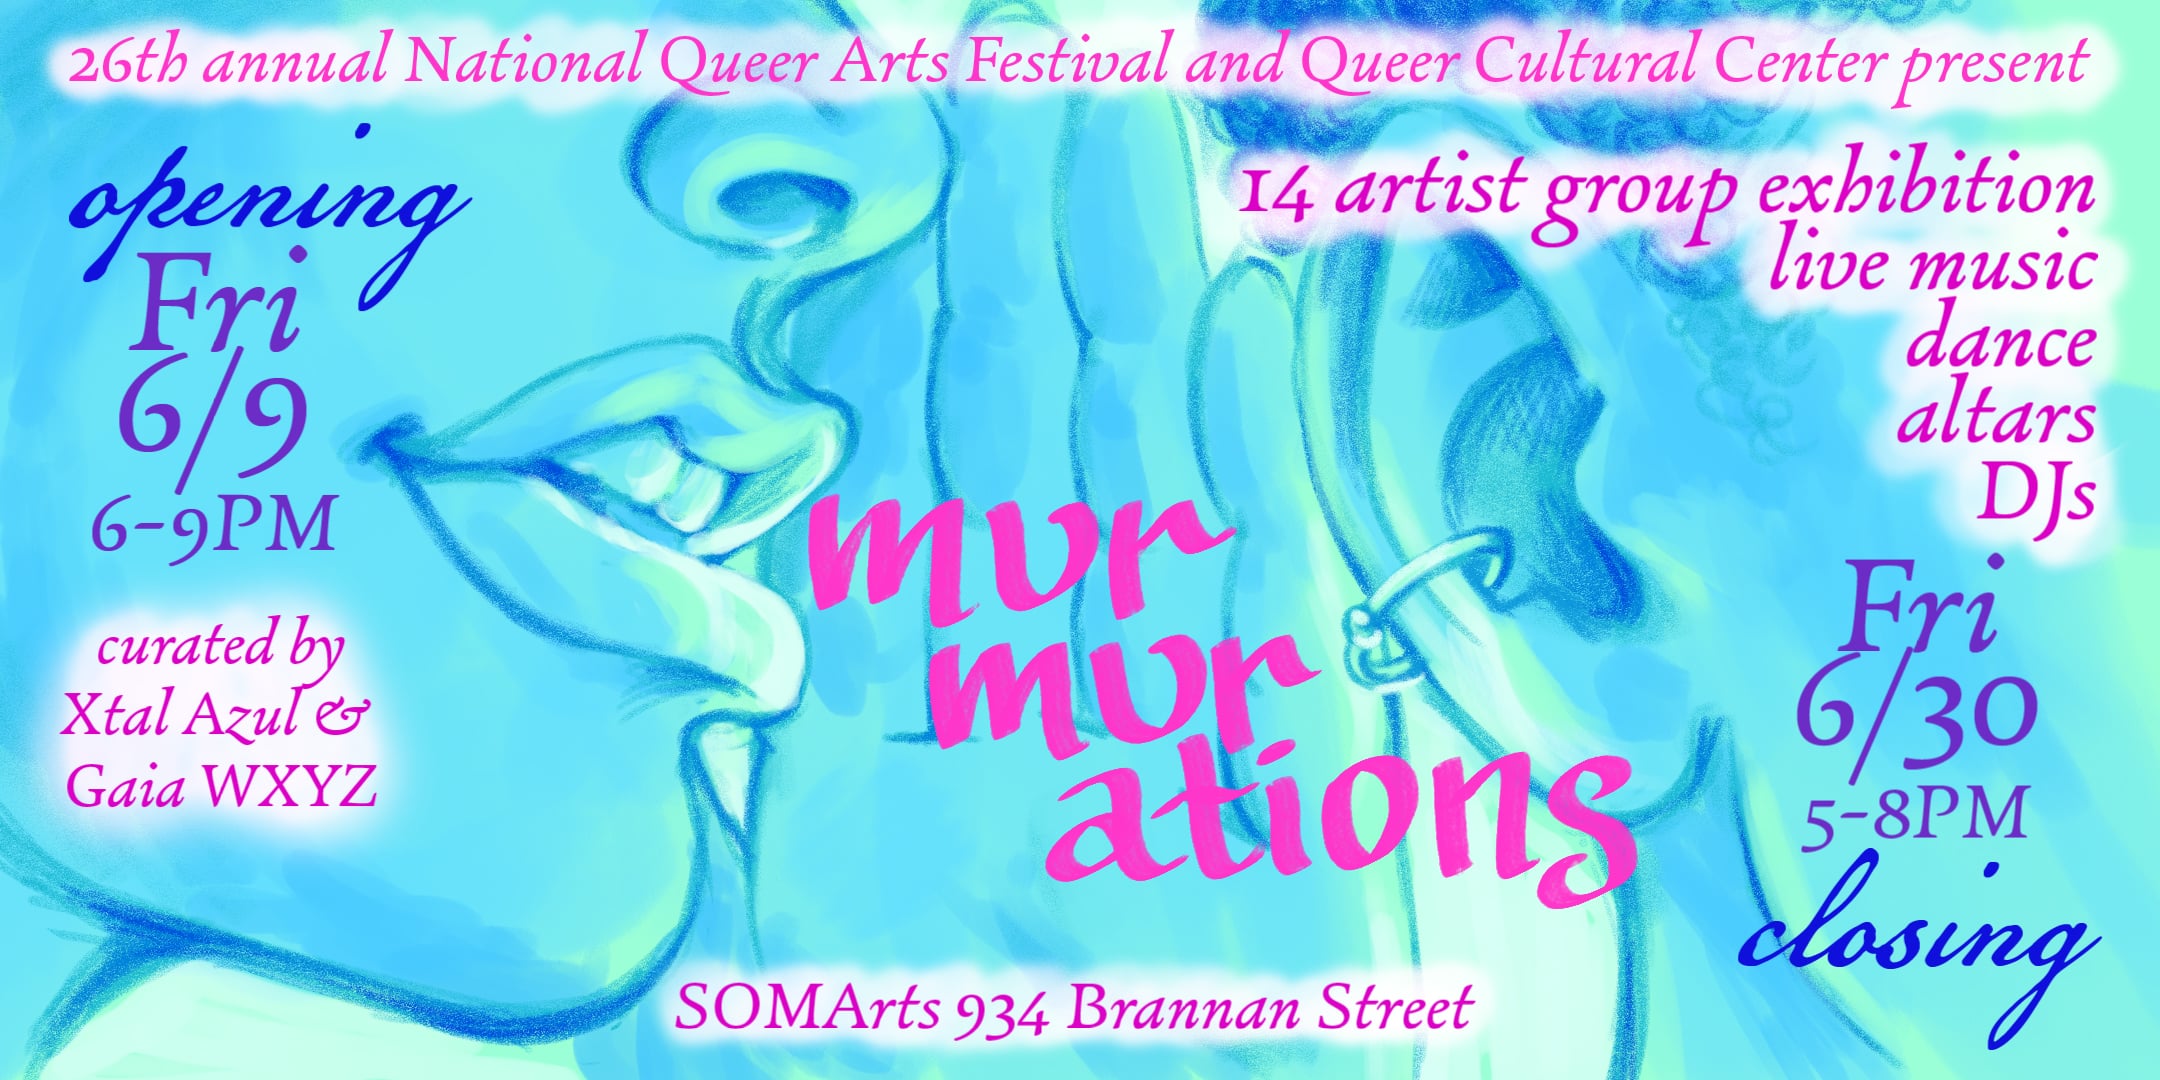 QCC presents murmurations: queer bodies of werQ